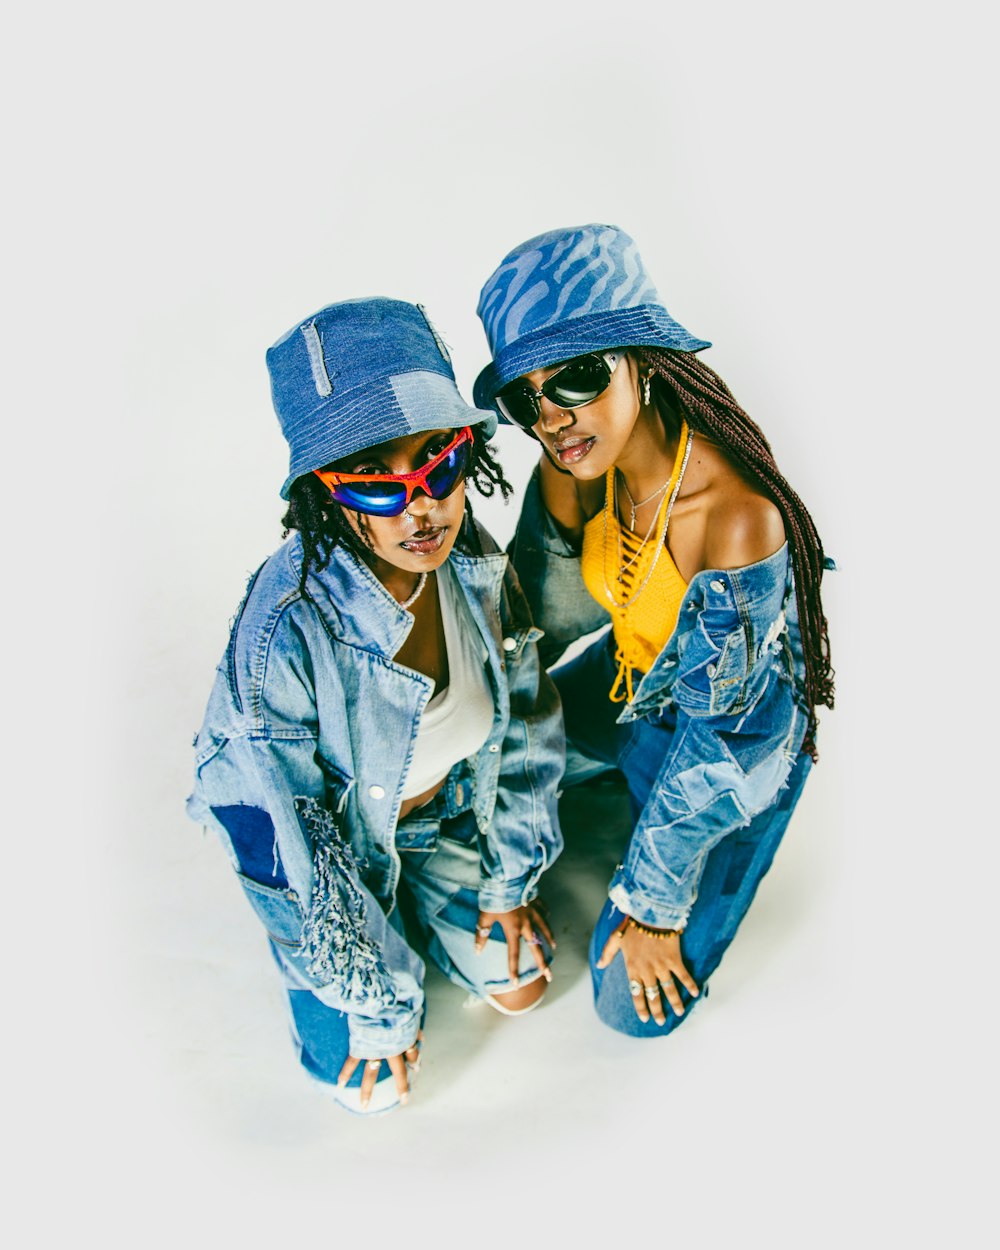 two young women wearing hats and jeans posing for a picture